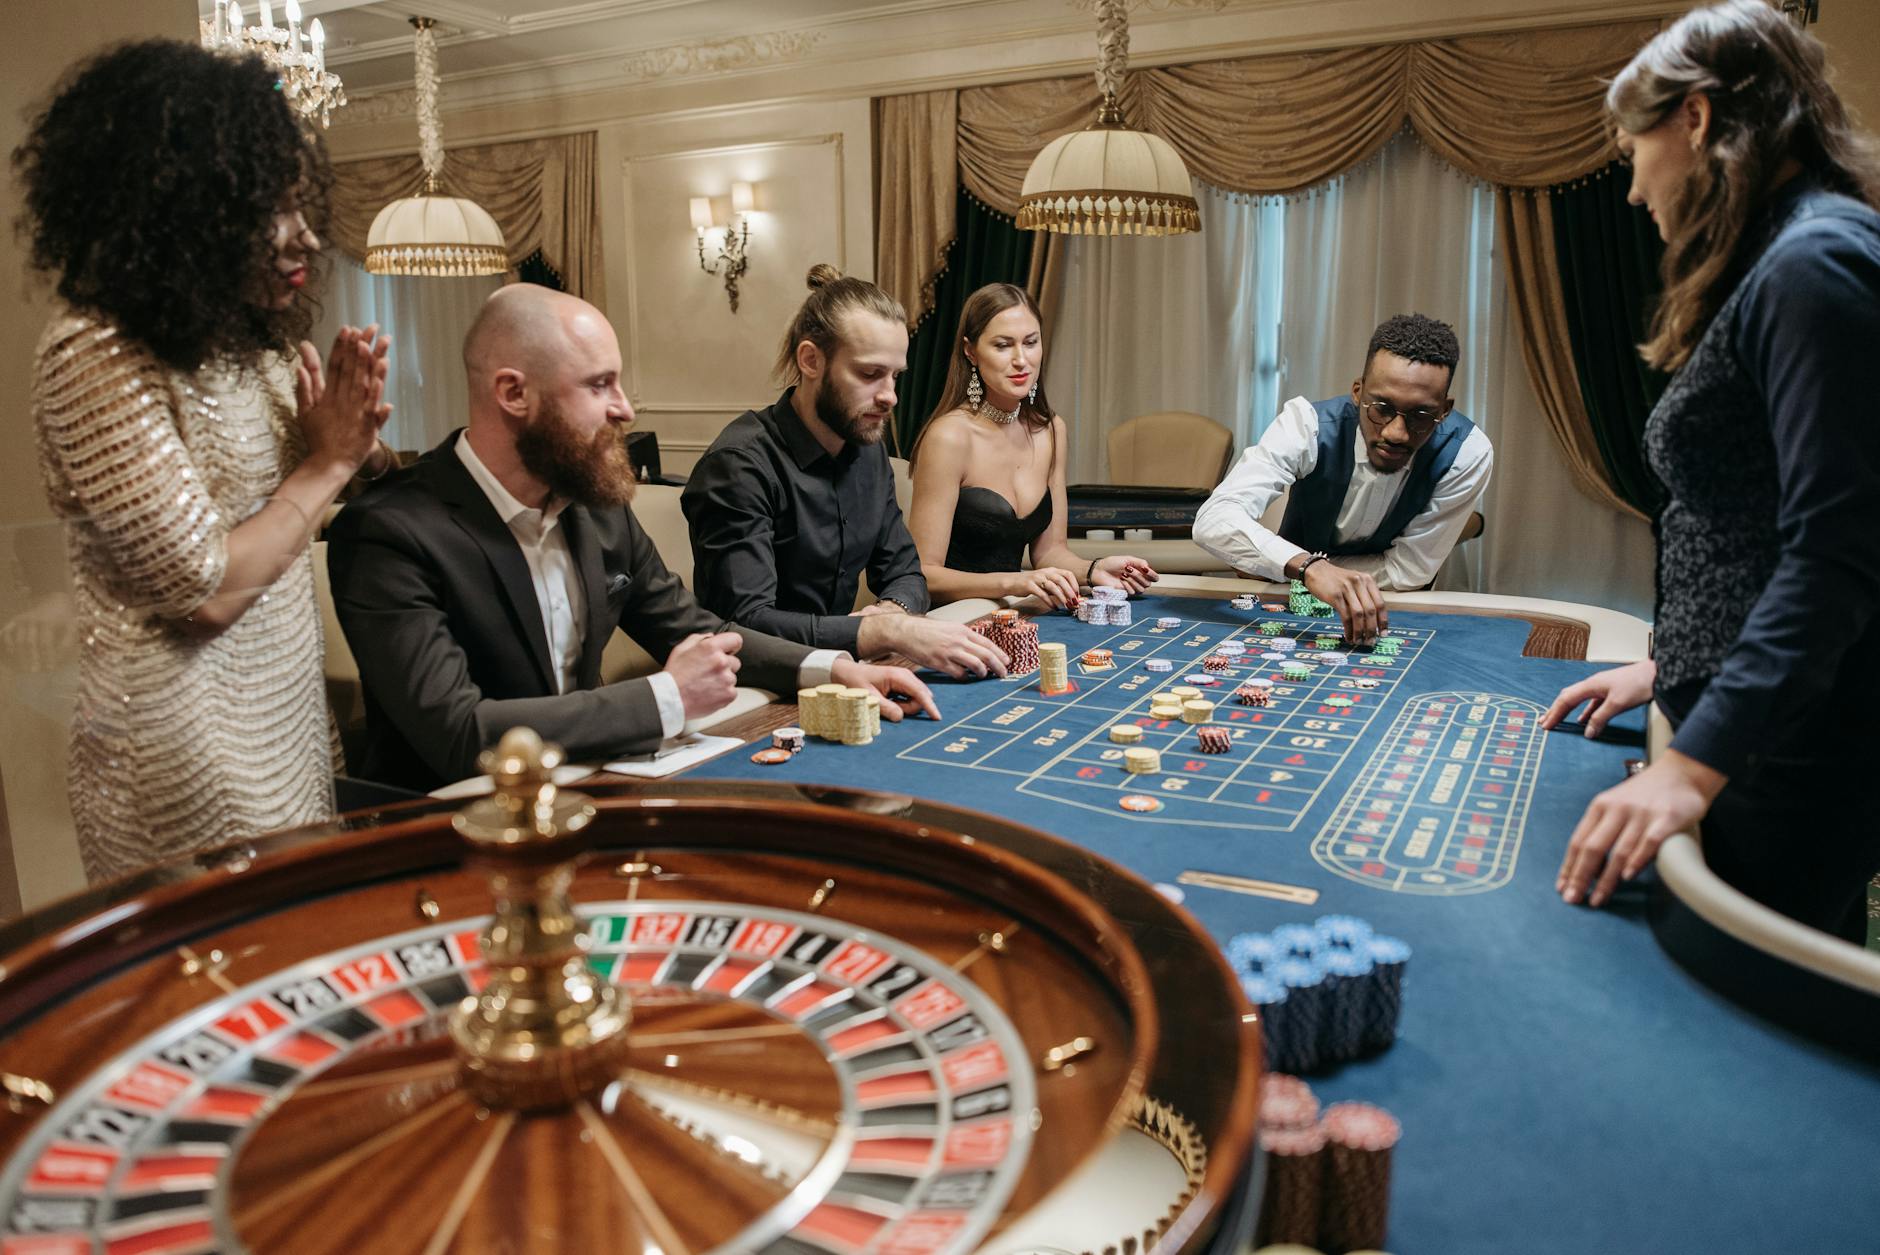 Group of People Gambling at a Roulette